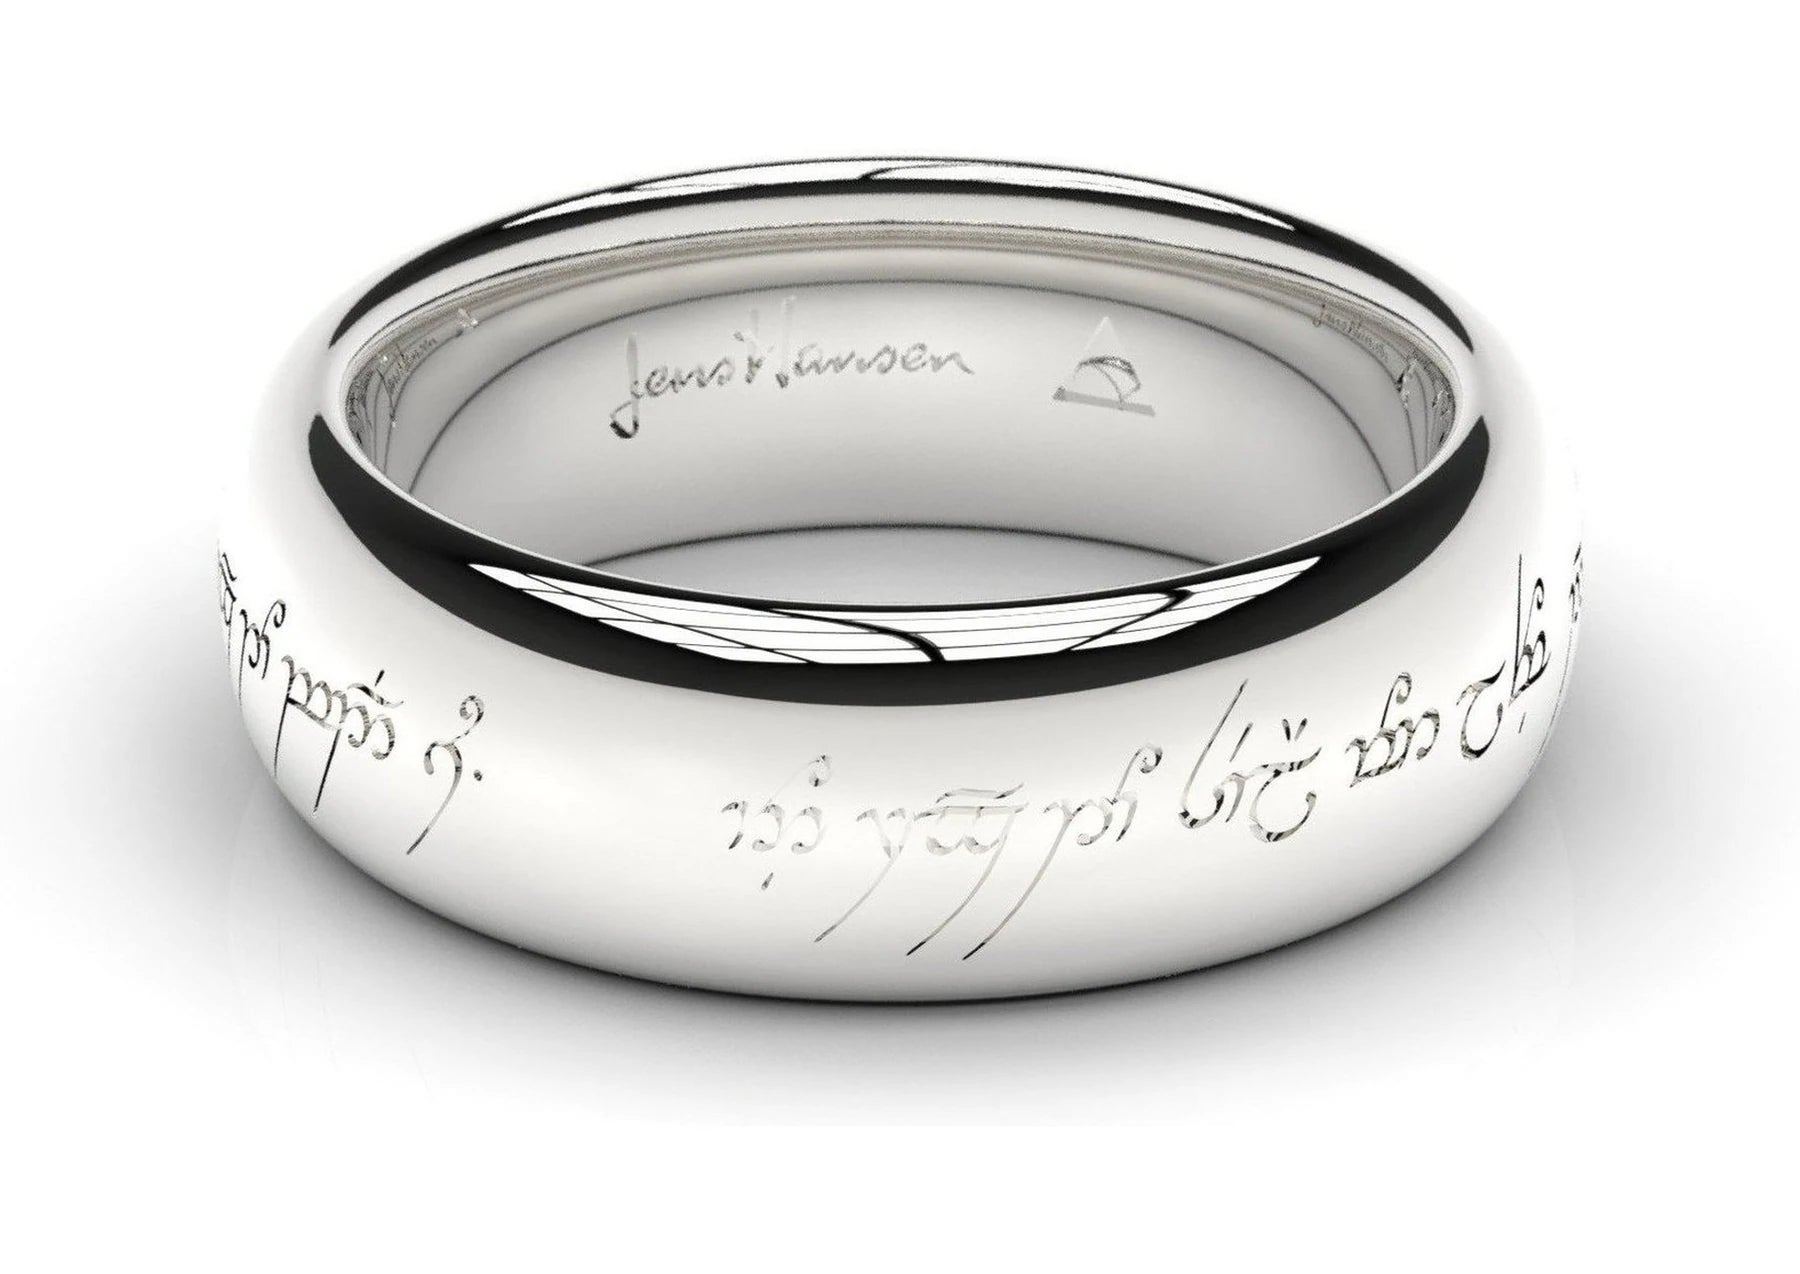 Aftermarket Rhodium Plating of The One Ring and other Jewellery